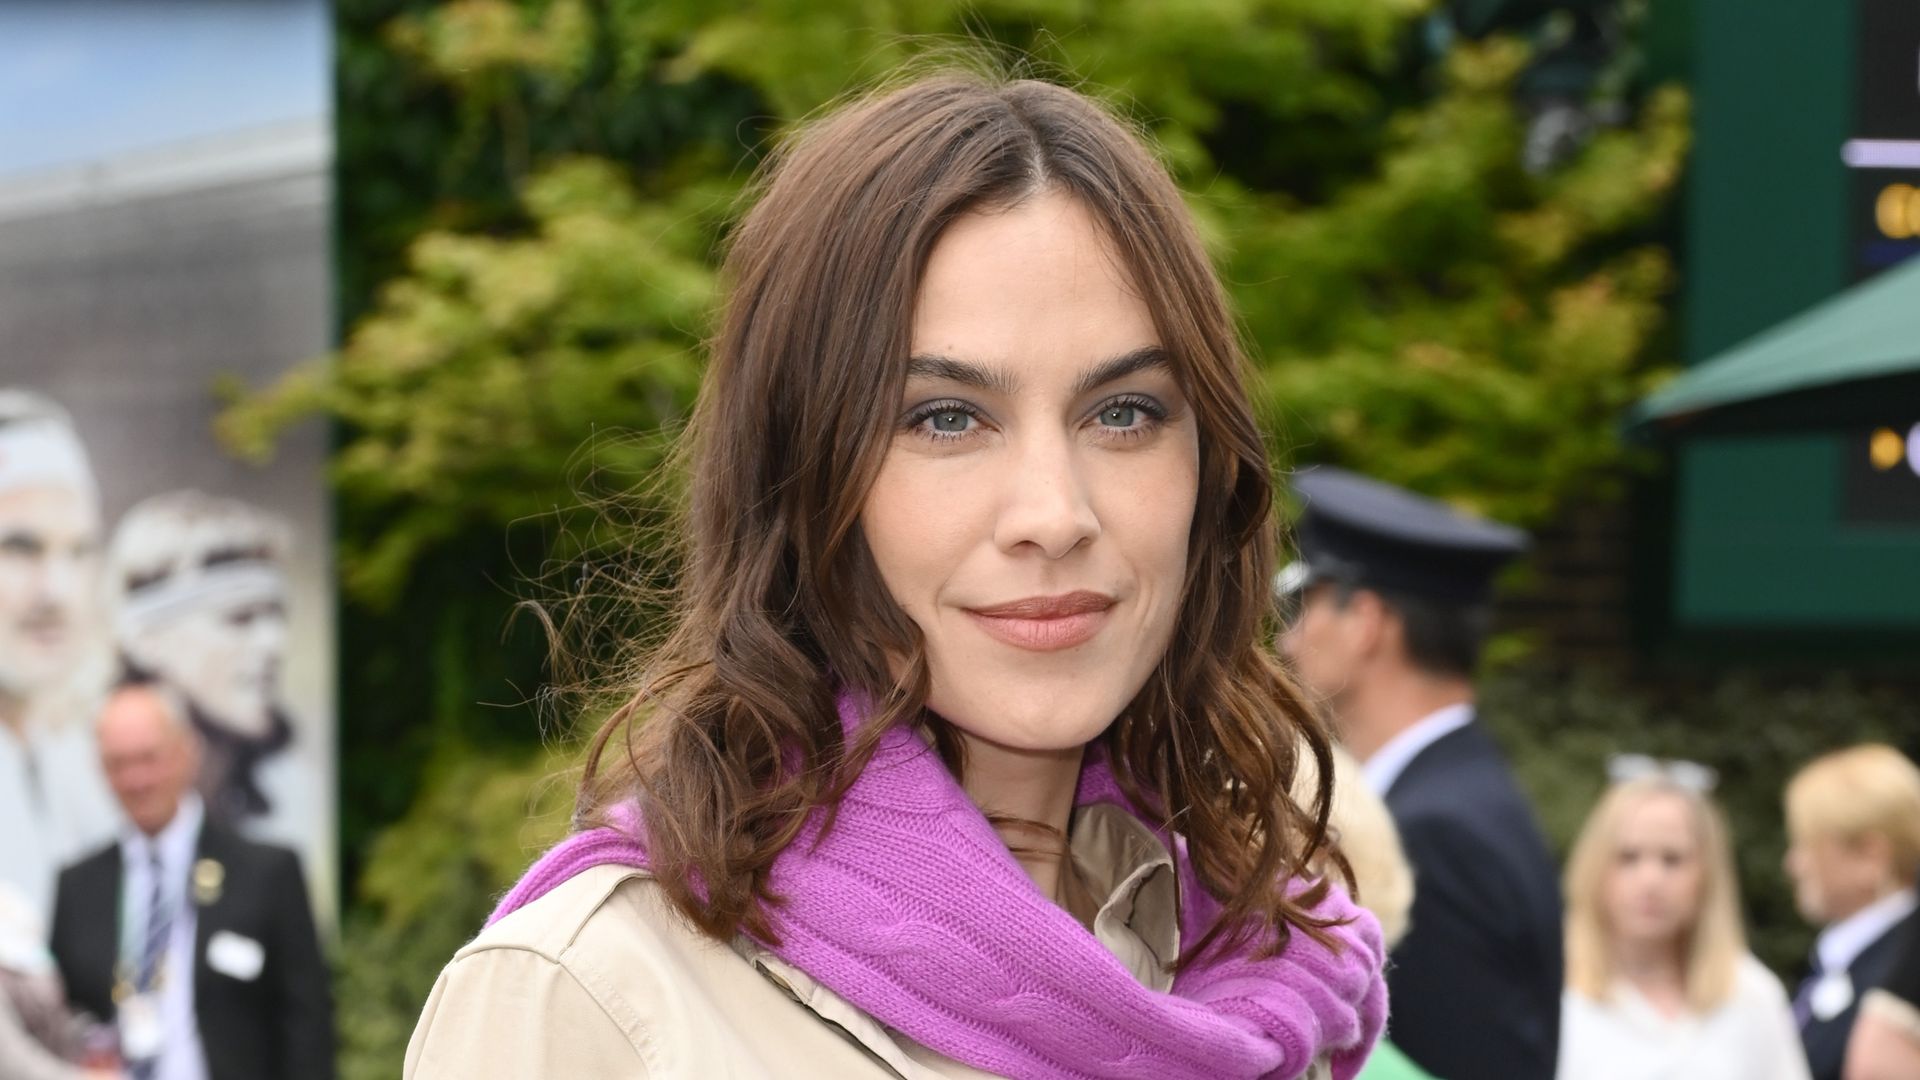 LONDON, ENGLAND - JULY 09: Alexa Chung attends day seven of the Wimbledon Tennis Championships at the All England Lawn Tennis and Croquet Club on July 09, 2023 in London, England. (Photo by Karwai Tang/WireImage)